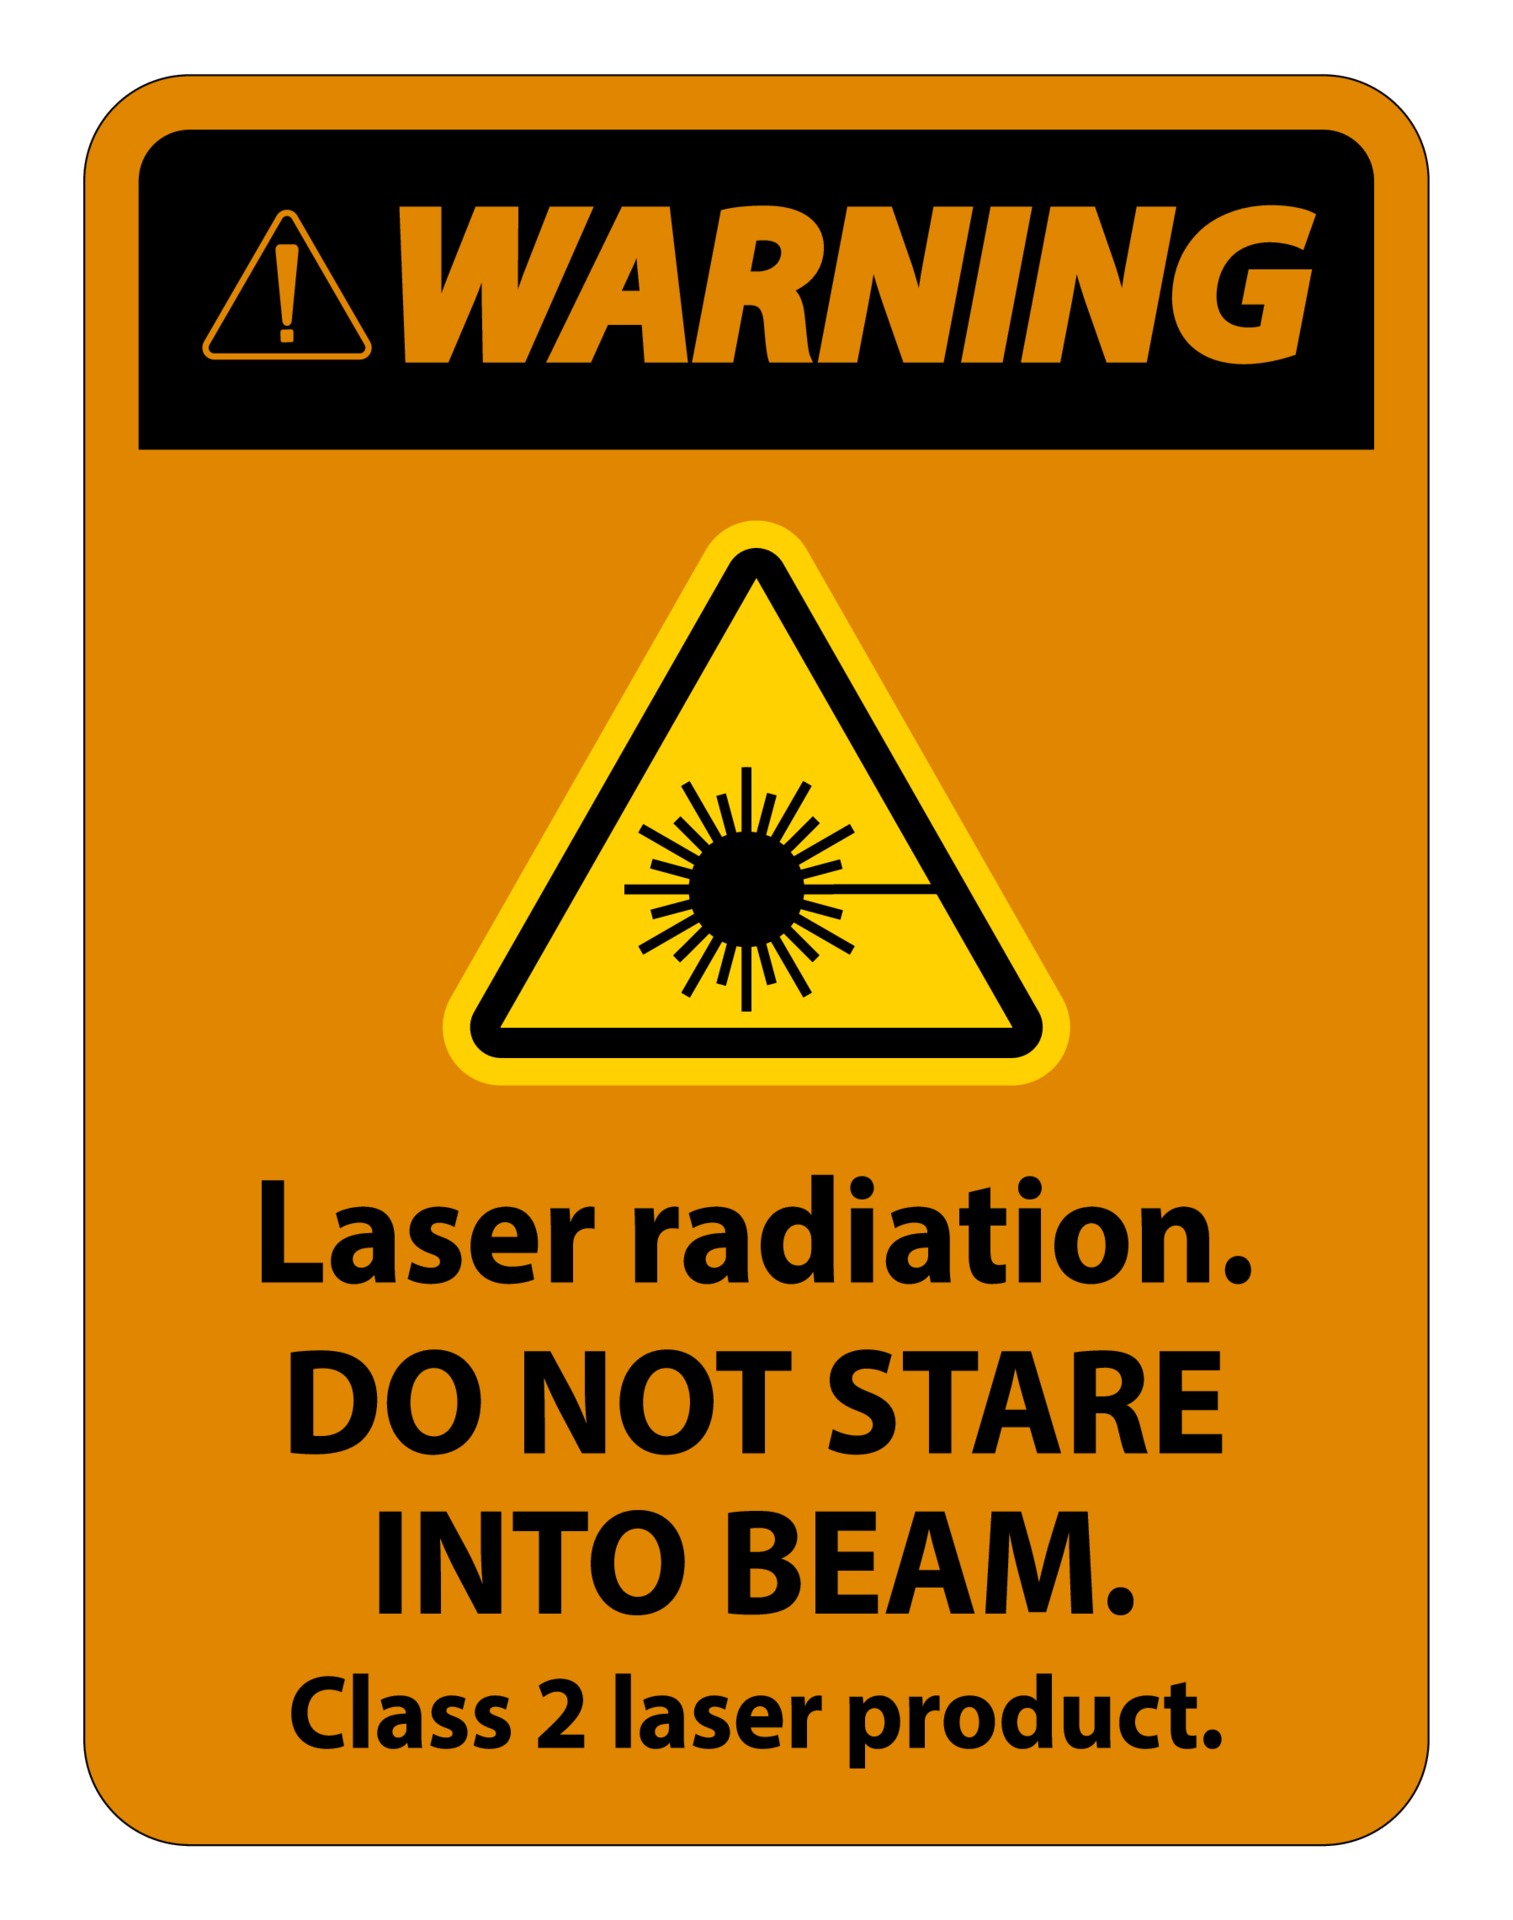 Warning Class 2 Laser Sign Laser Radiation Do Not Stare Into Beam 